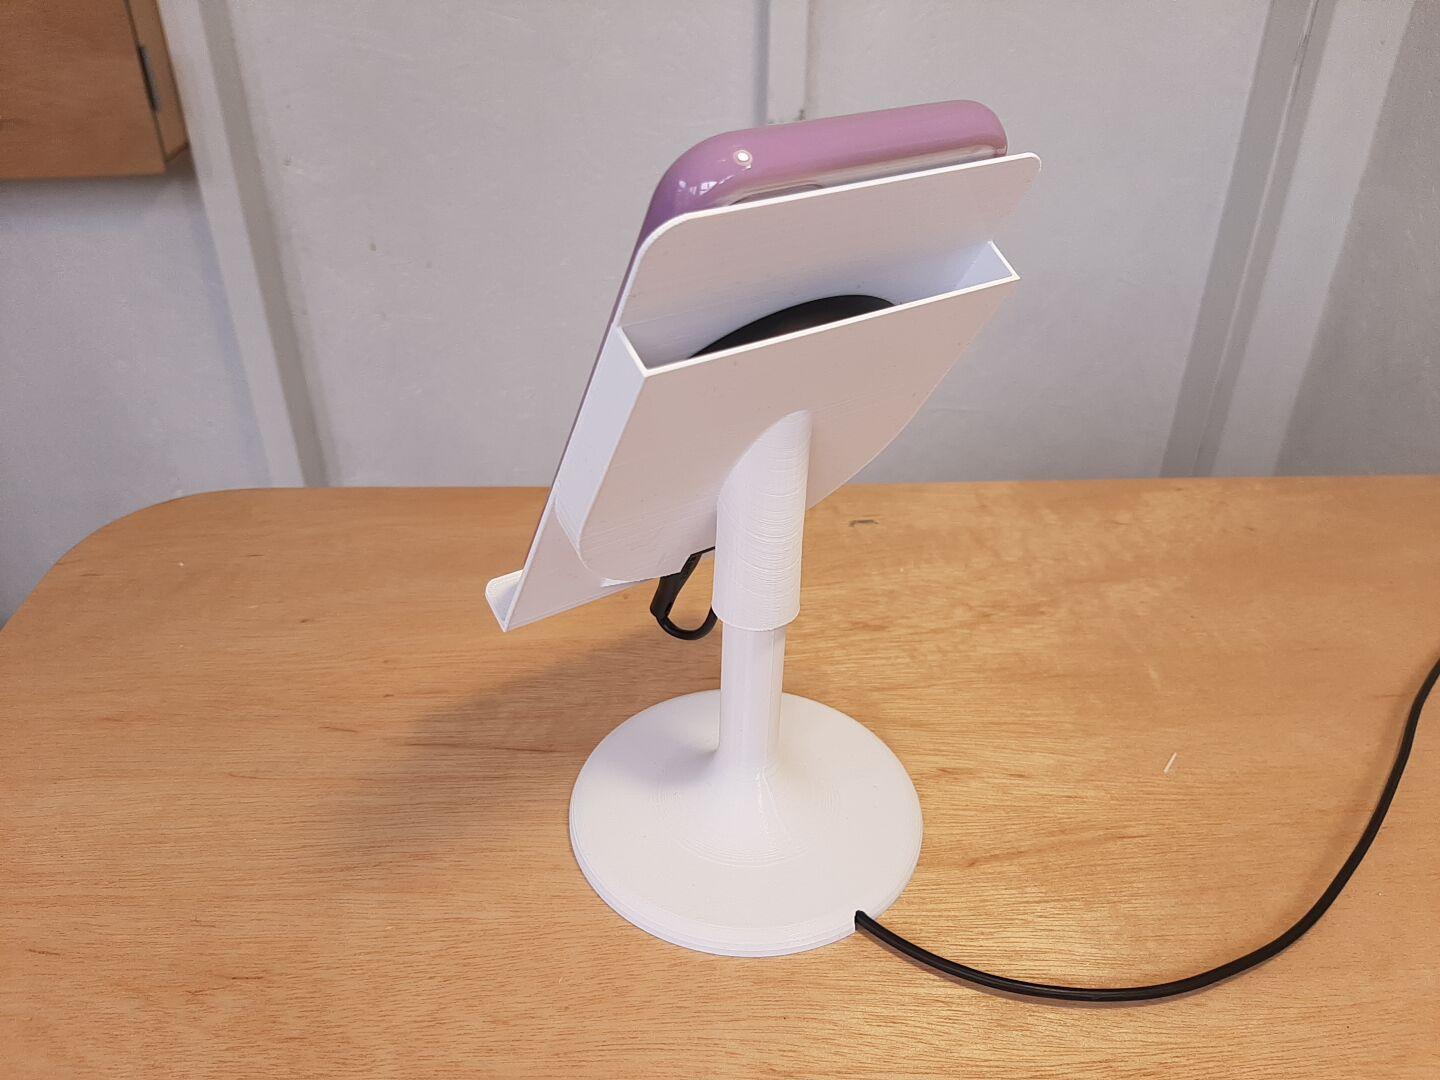 Wireless phone charger stand - Ikea Hack 3d model